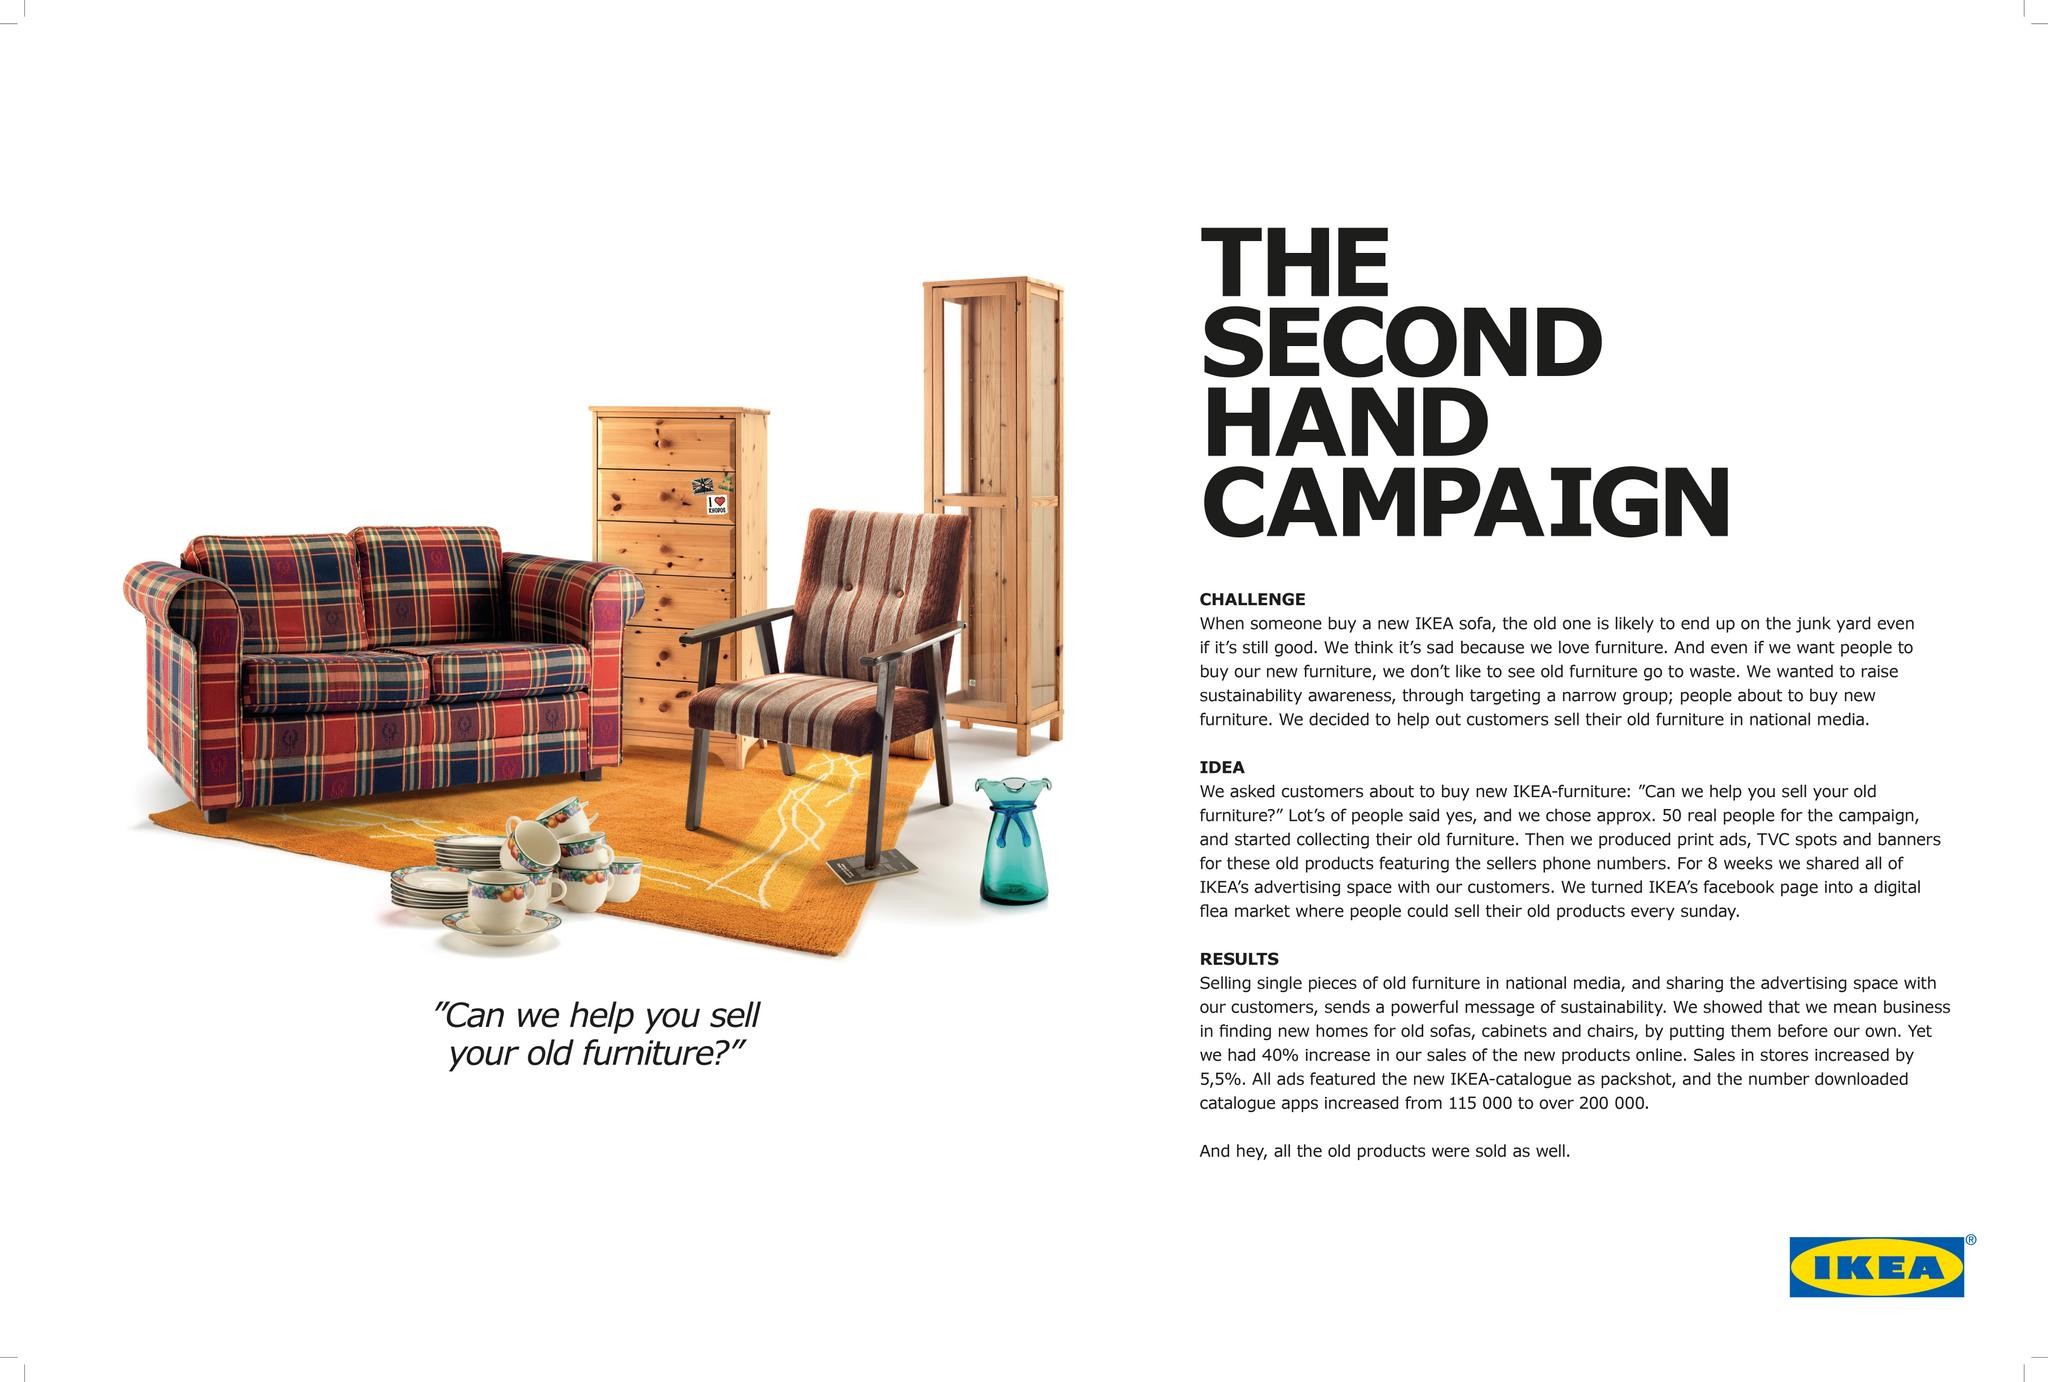 THE SECOND HAND CAMPAIGN